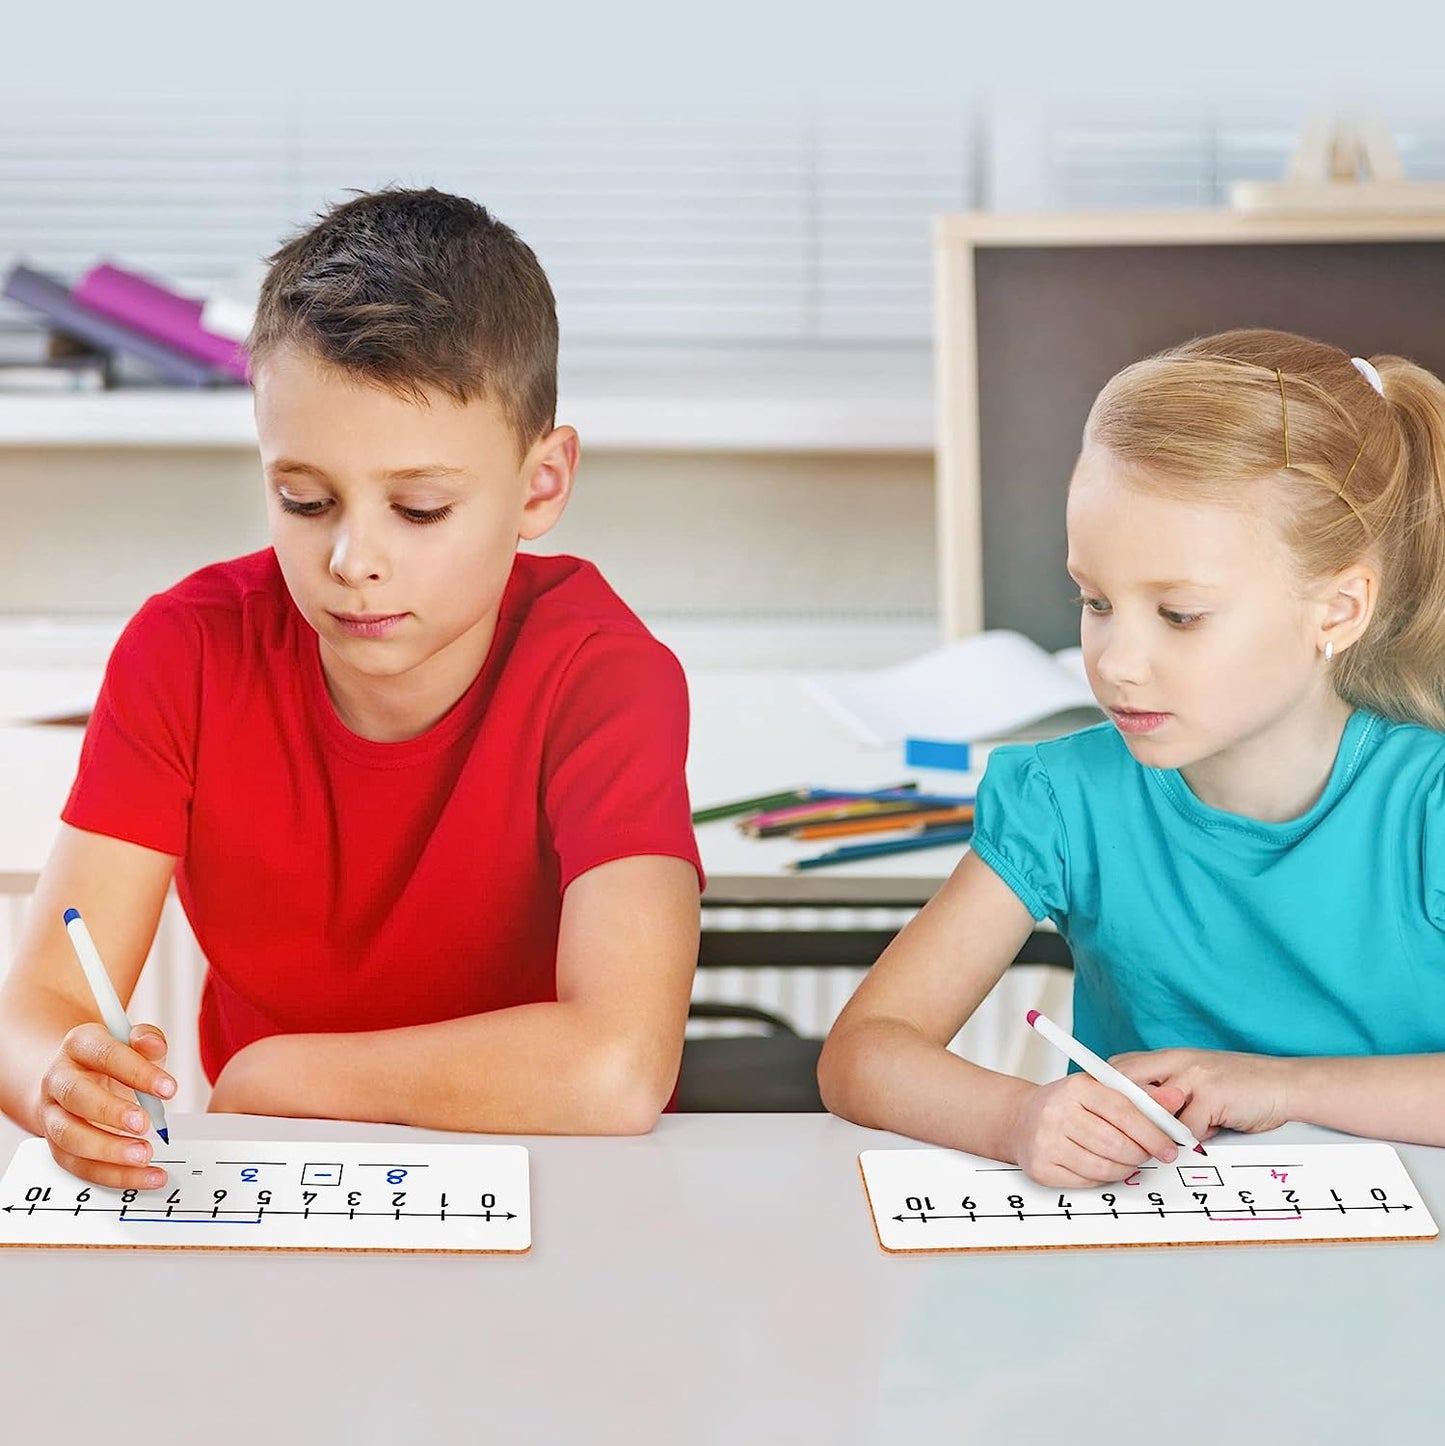 4x12 number line dry erase board for students